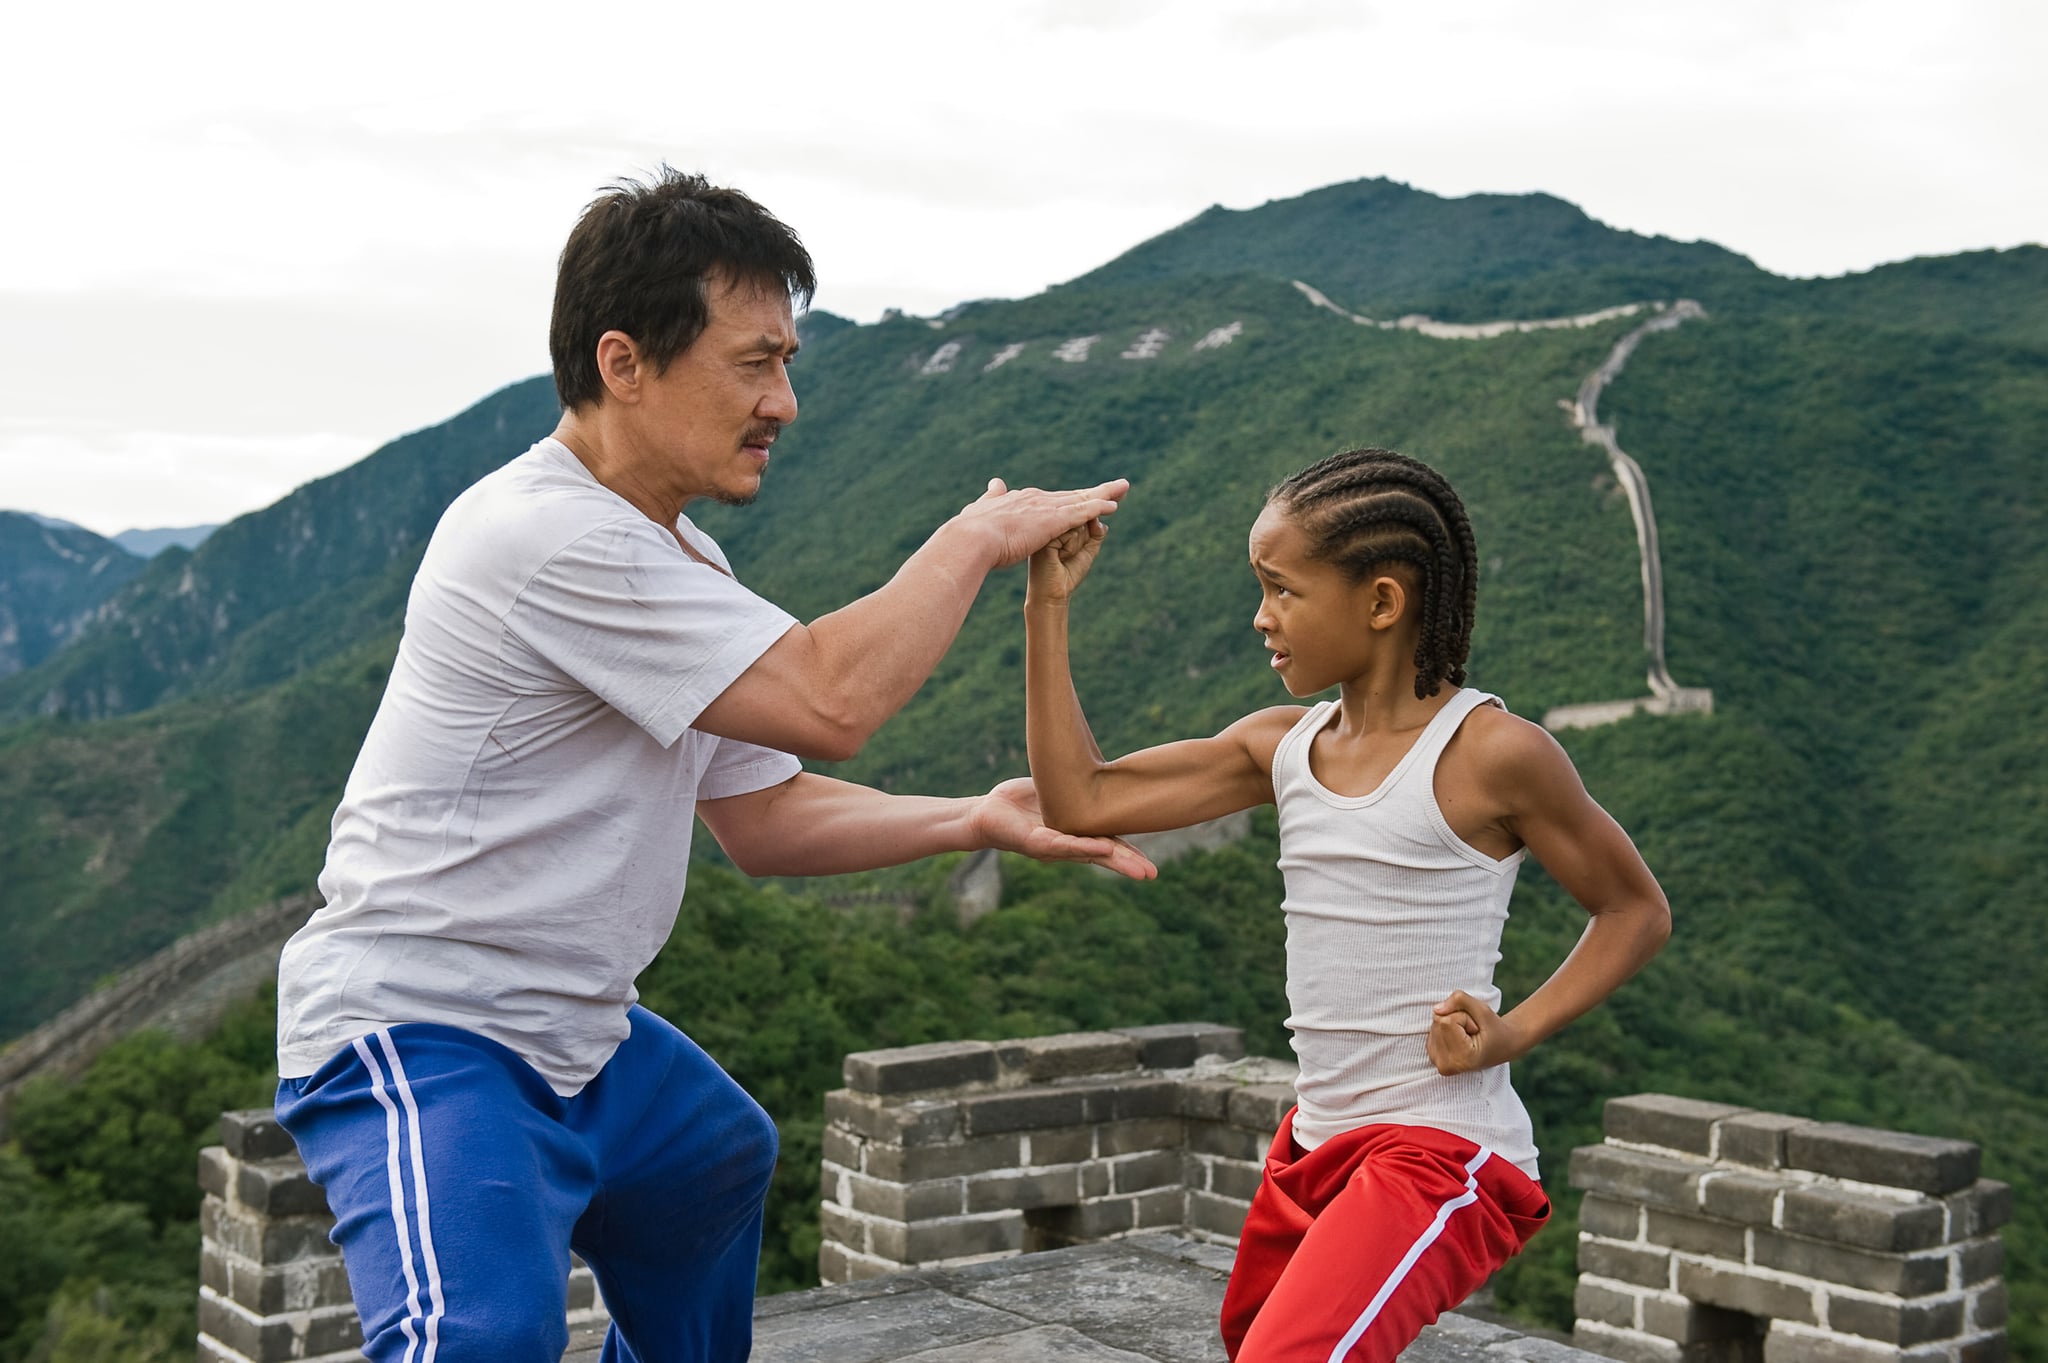 THE KARATE KID, from left: Jackie Chan, Jaden Smith, 2010. ph: Jasin Boland/Columbia Pictures/courtesy Everett Collection